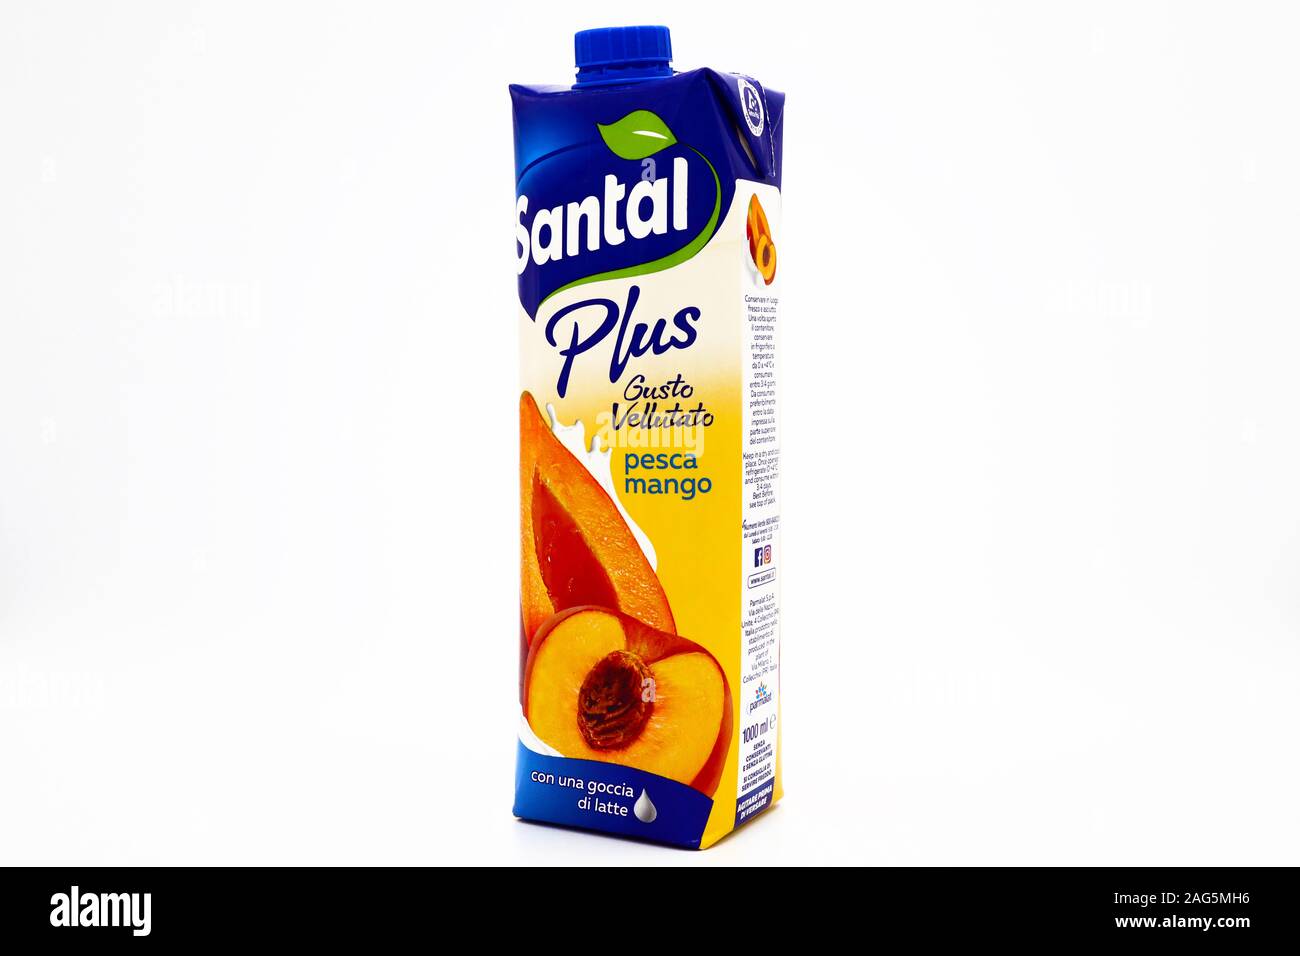 Santal Fruit Juice. Santal is an Italian brand of juices and nectars  product by Parmalat, Lactalis Group Stock Photo - Alamy